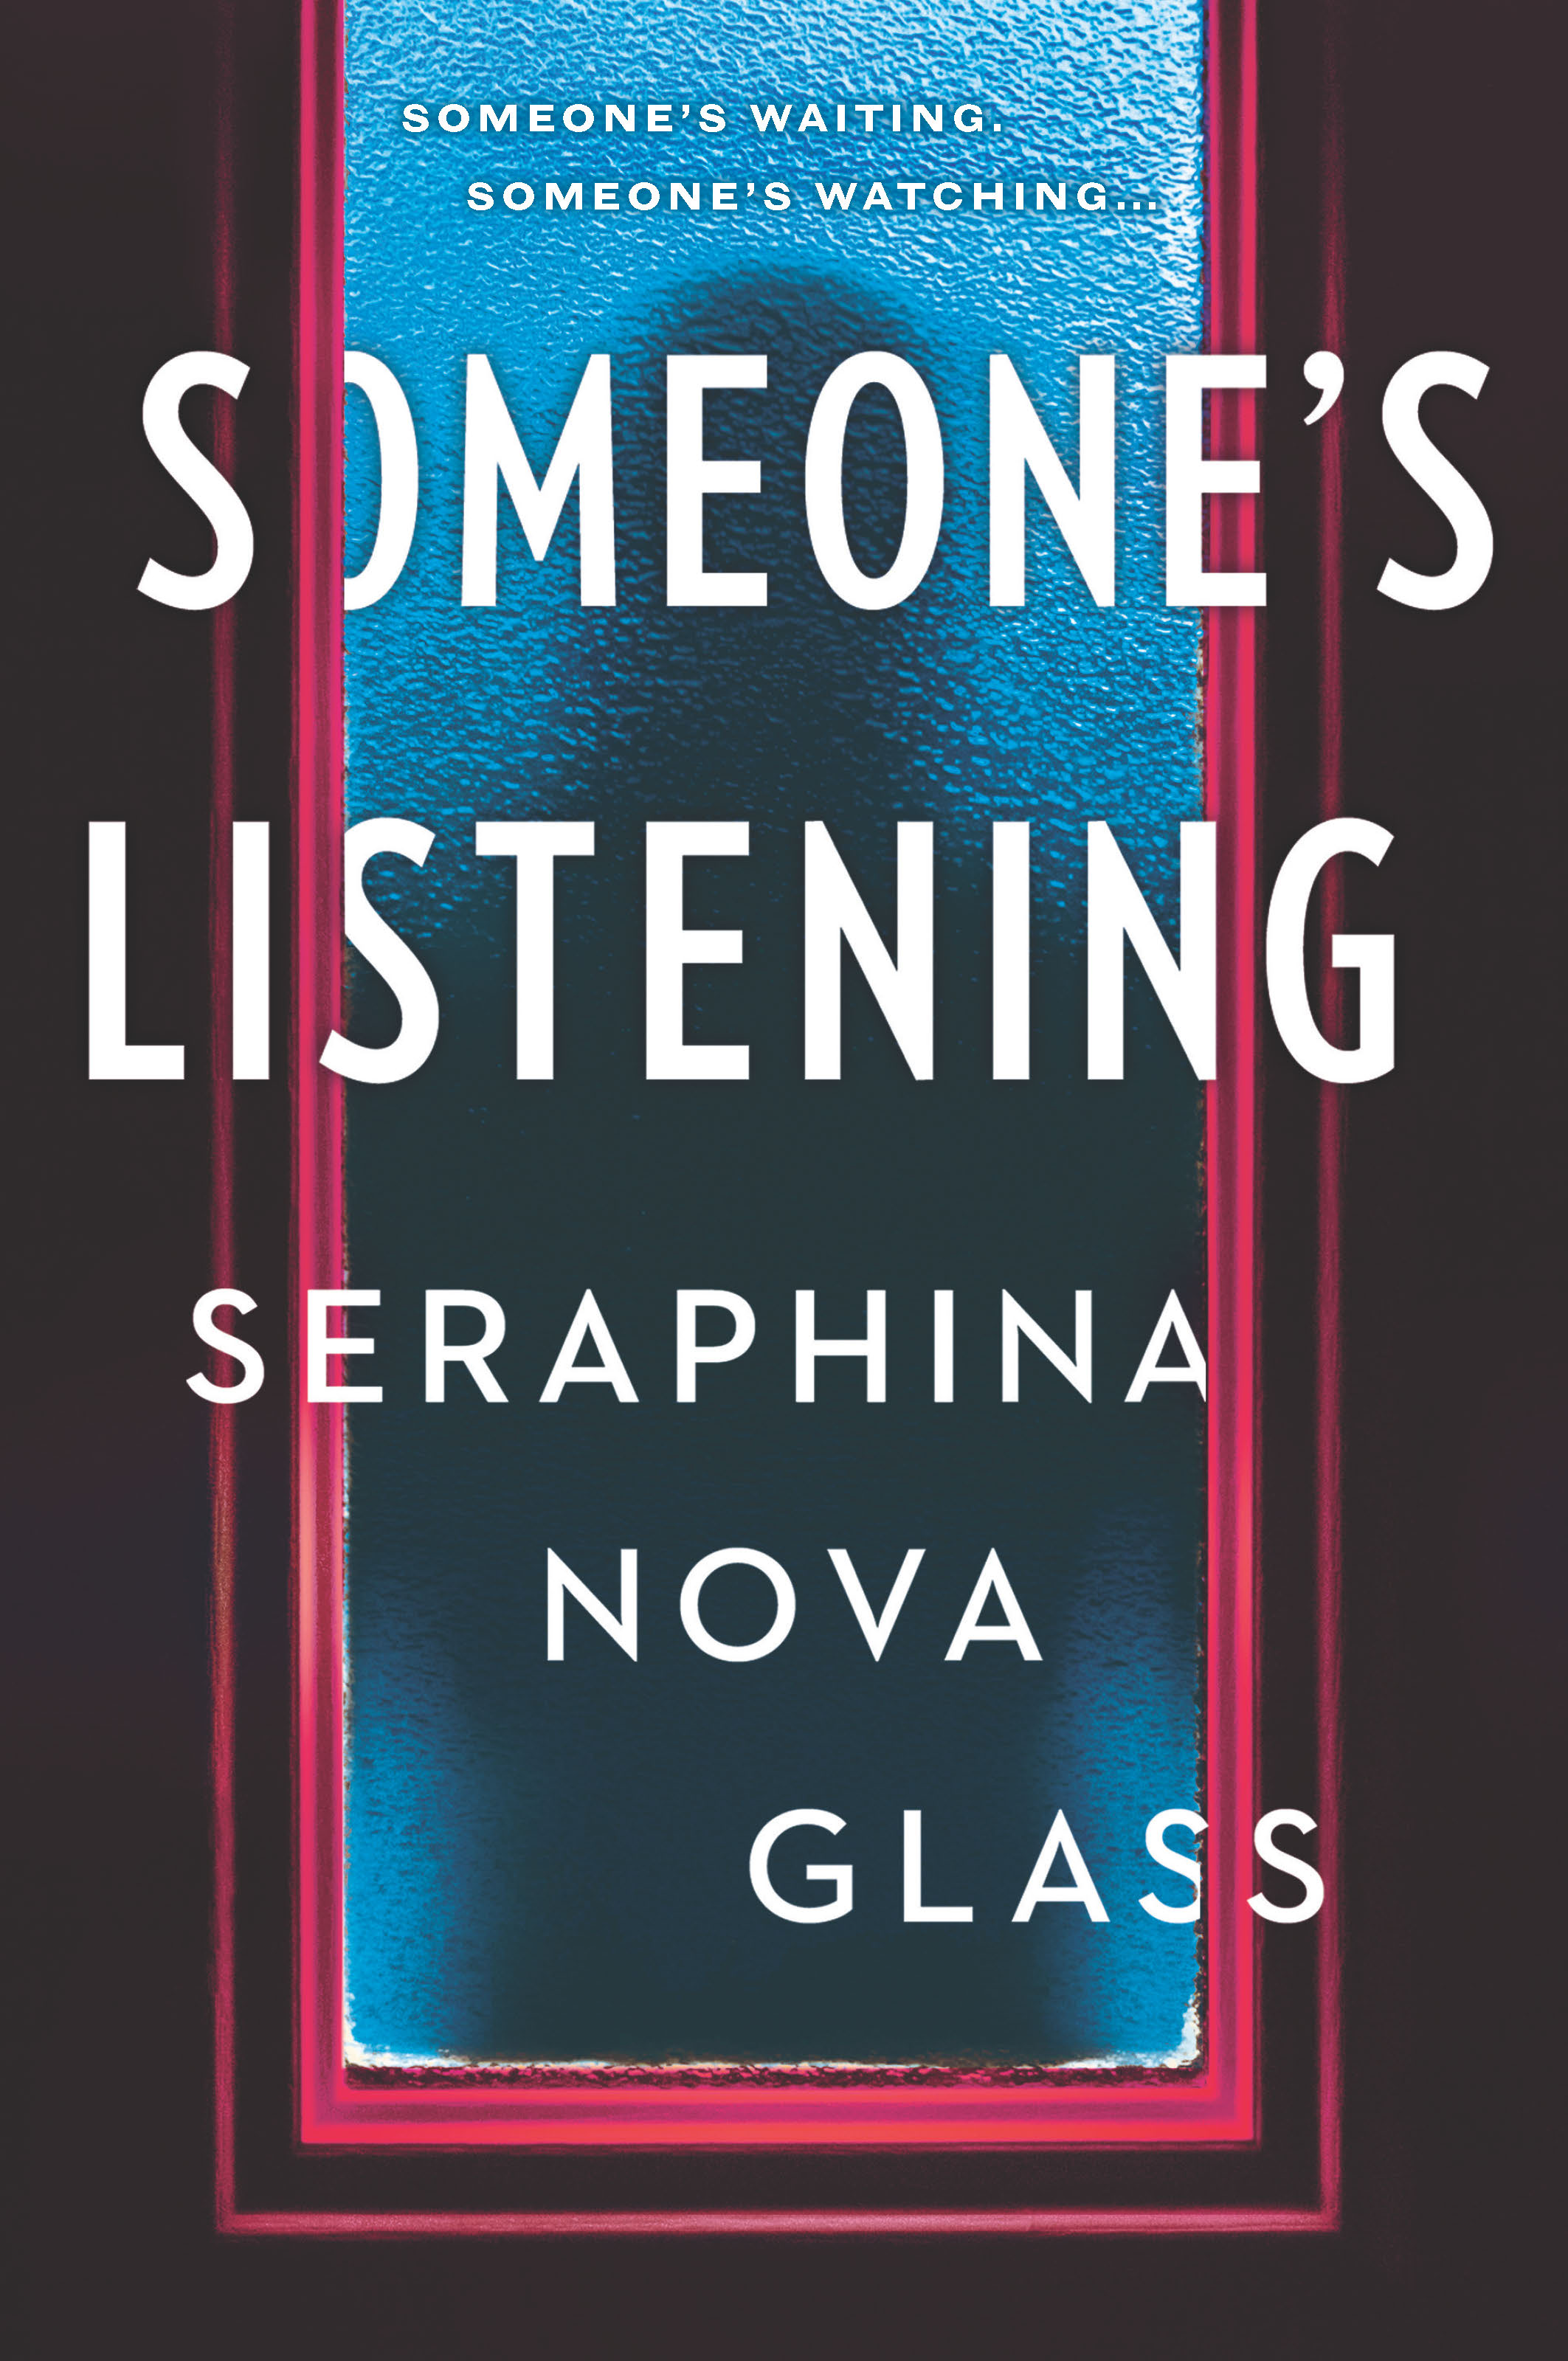 Review: Someone’s Listening by Seraphina Nova Glass